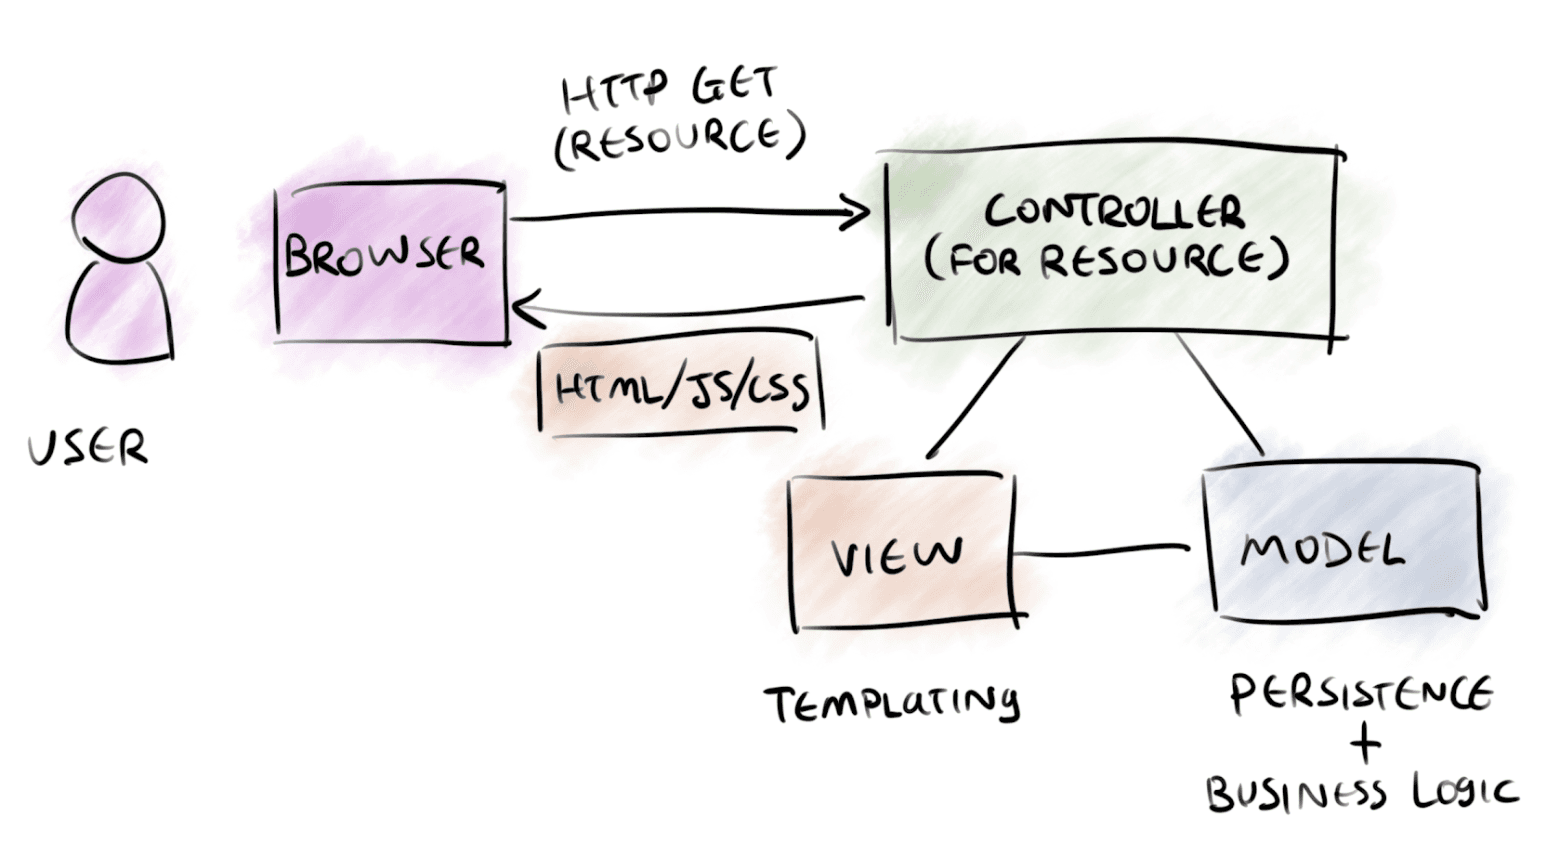 Controllers respond to HTTP requests